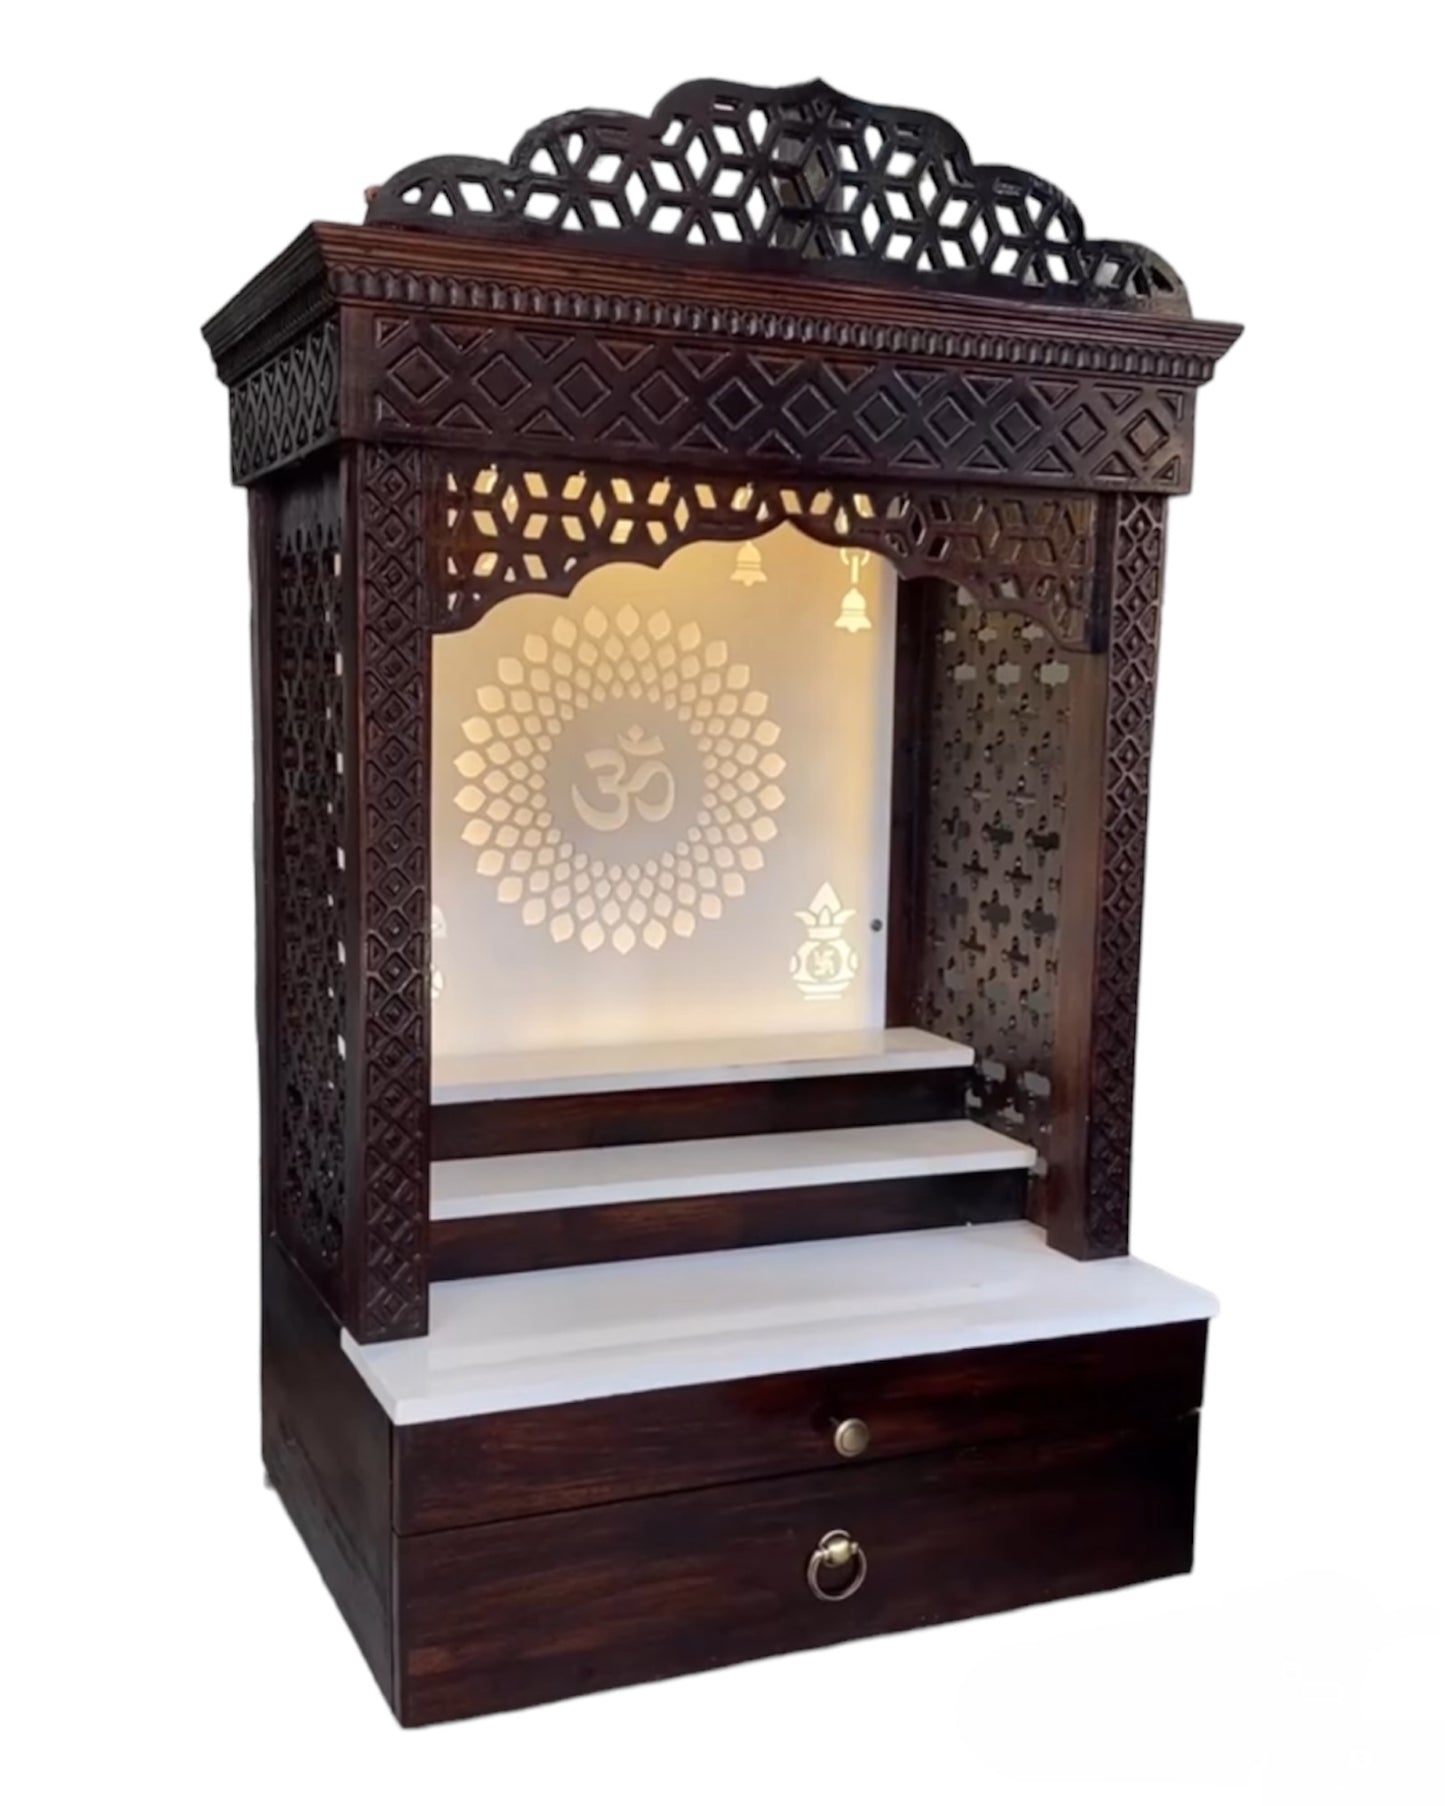 This Brown Teakwood Modern & Simplistic Designed Pooja Temple, Mandir for Home and Office